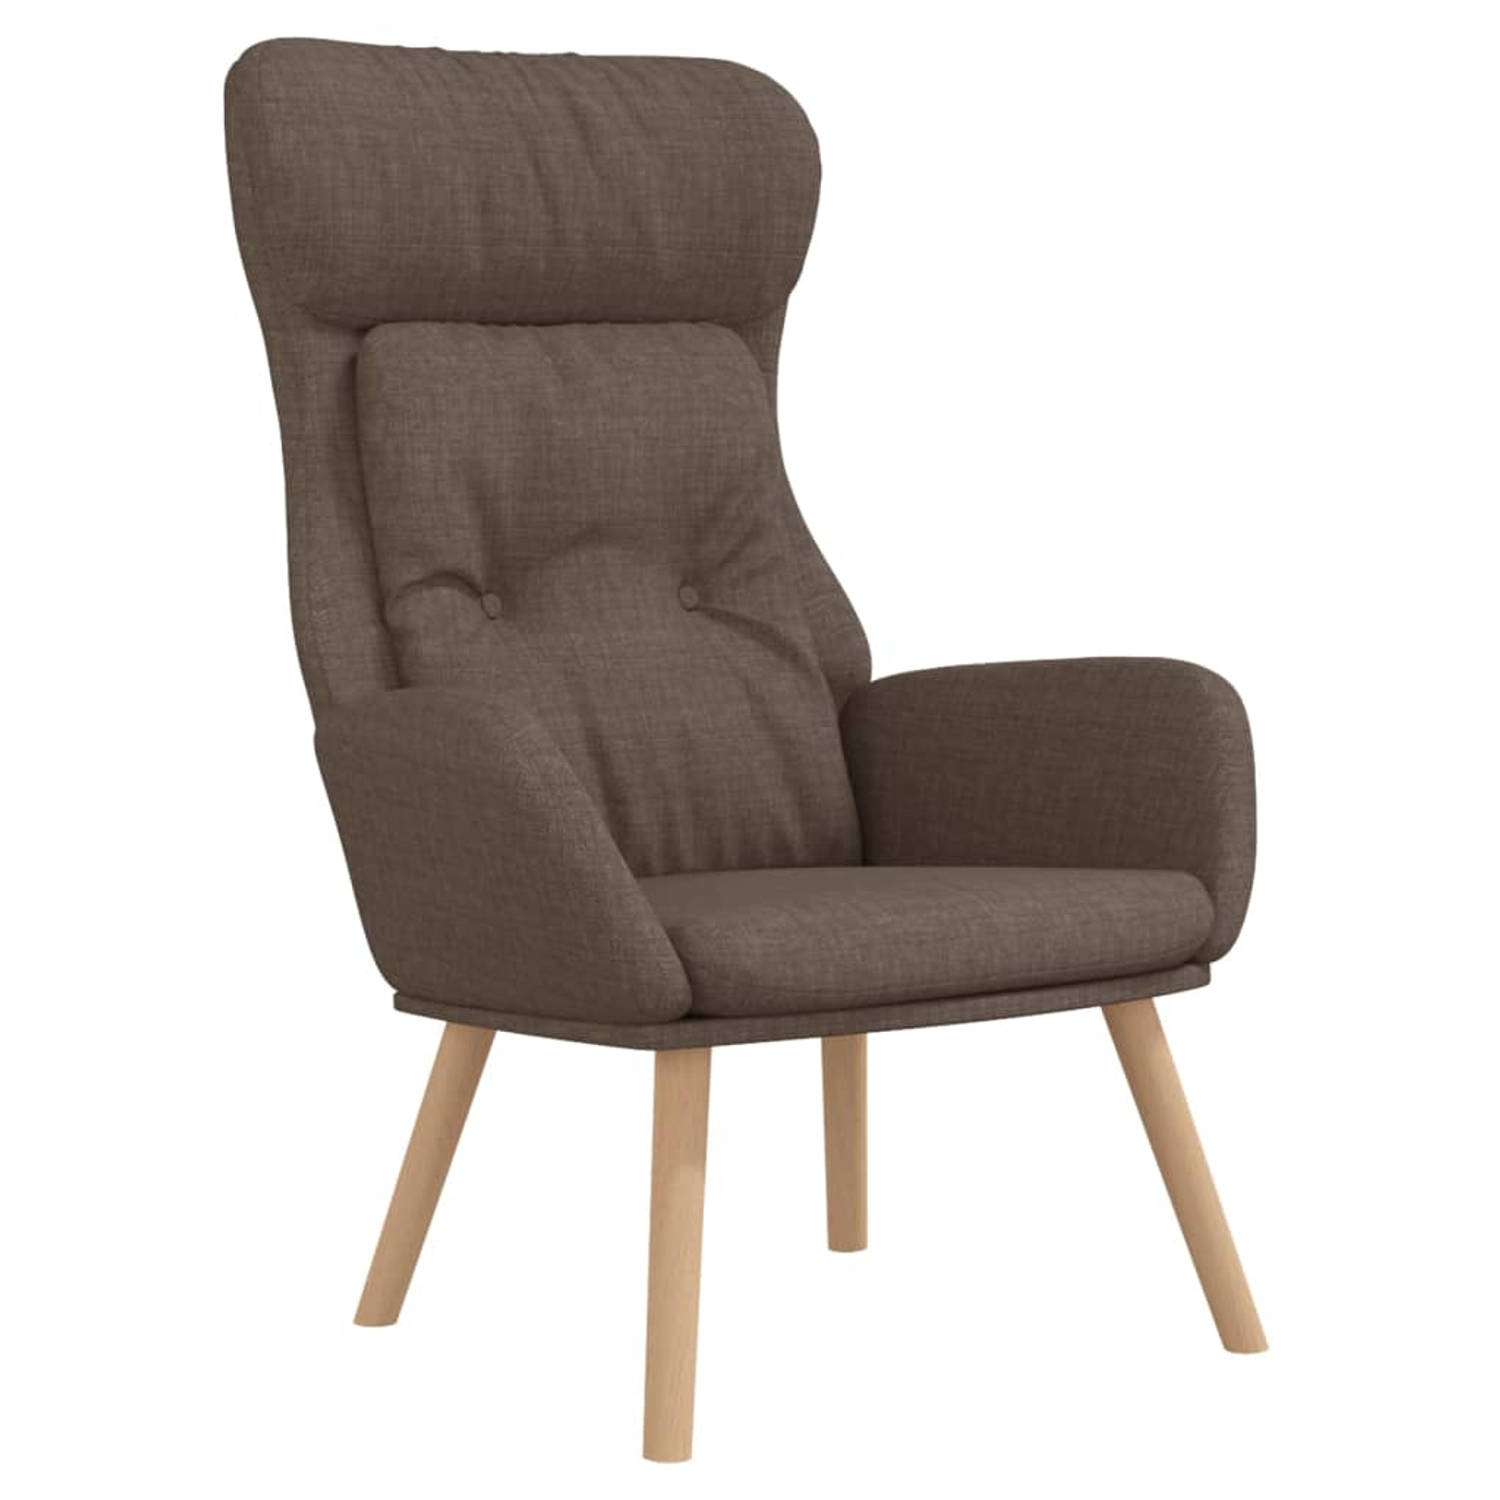 The Living Store Relaxstoel stof taupe - Fauteuil